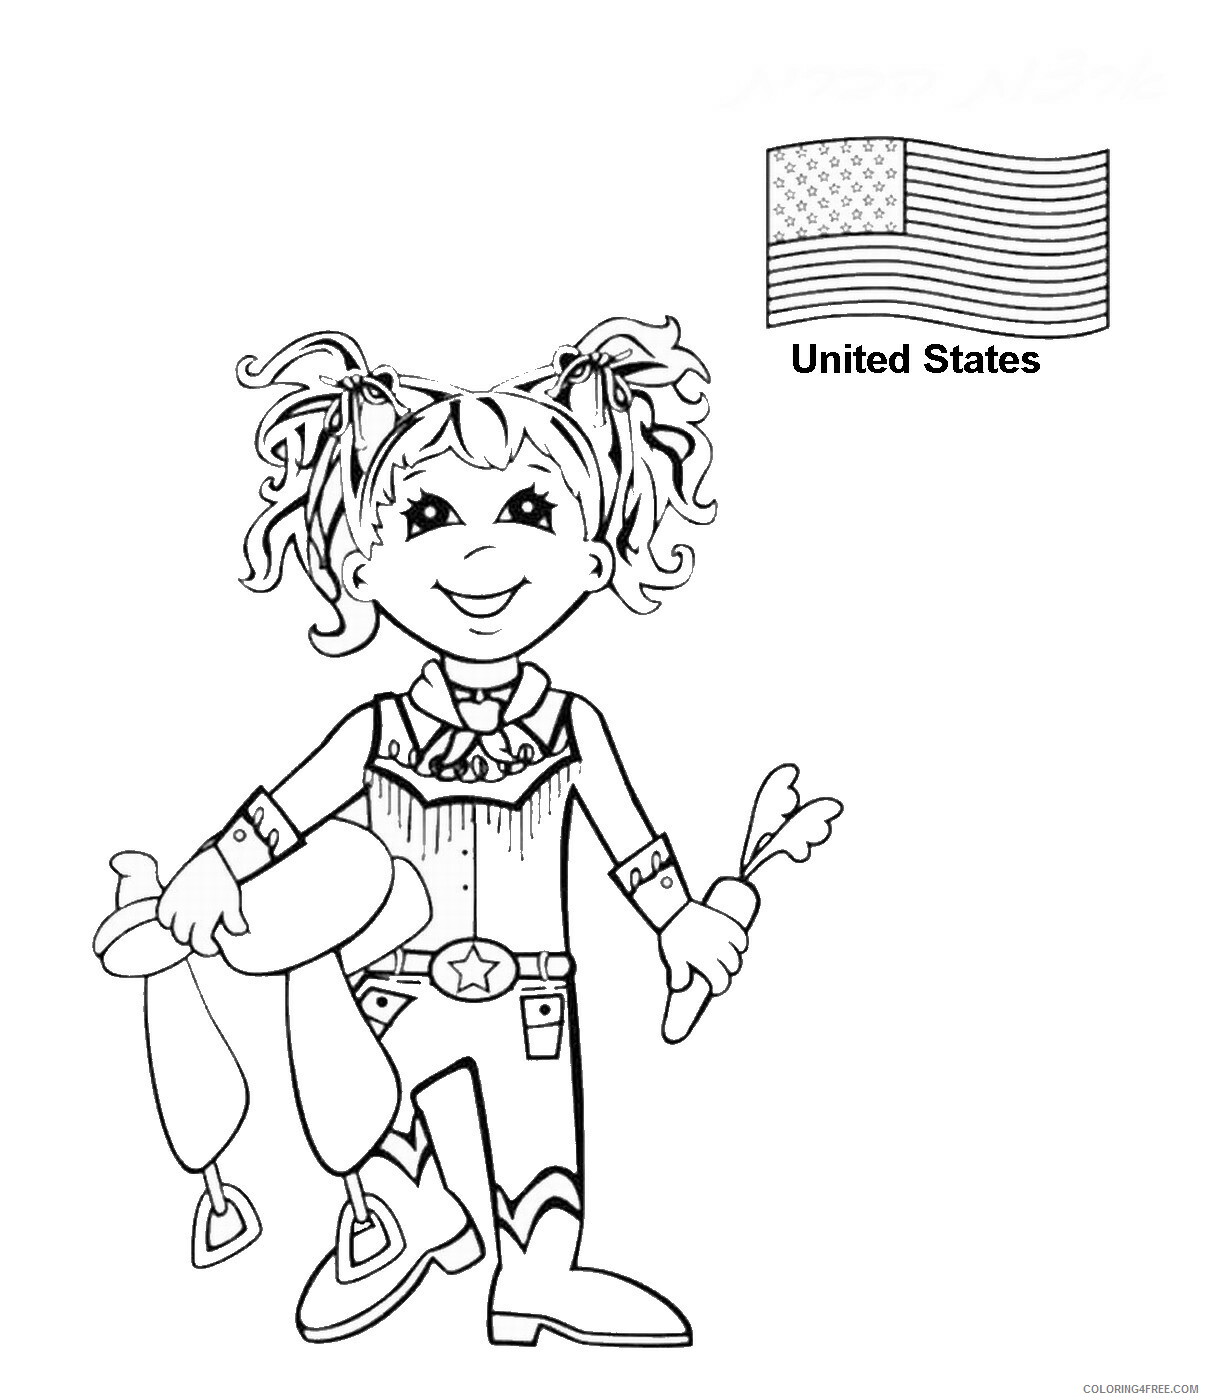 Around the World Coloring Pages united states 2 Printable 2021 0340 Coloring4free